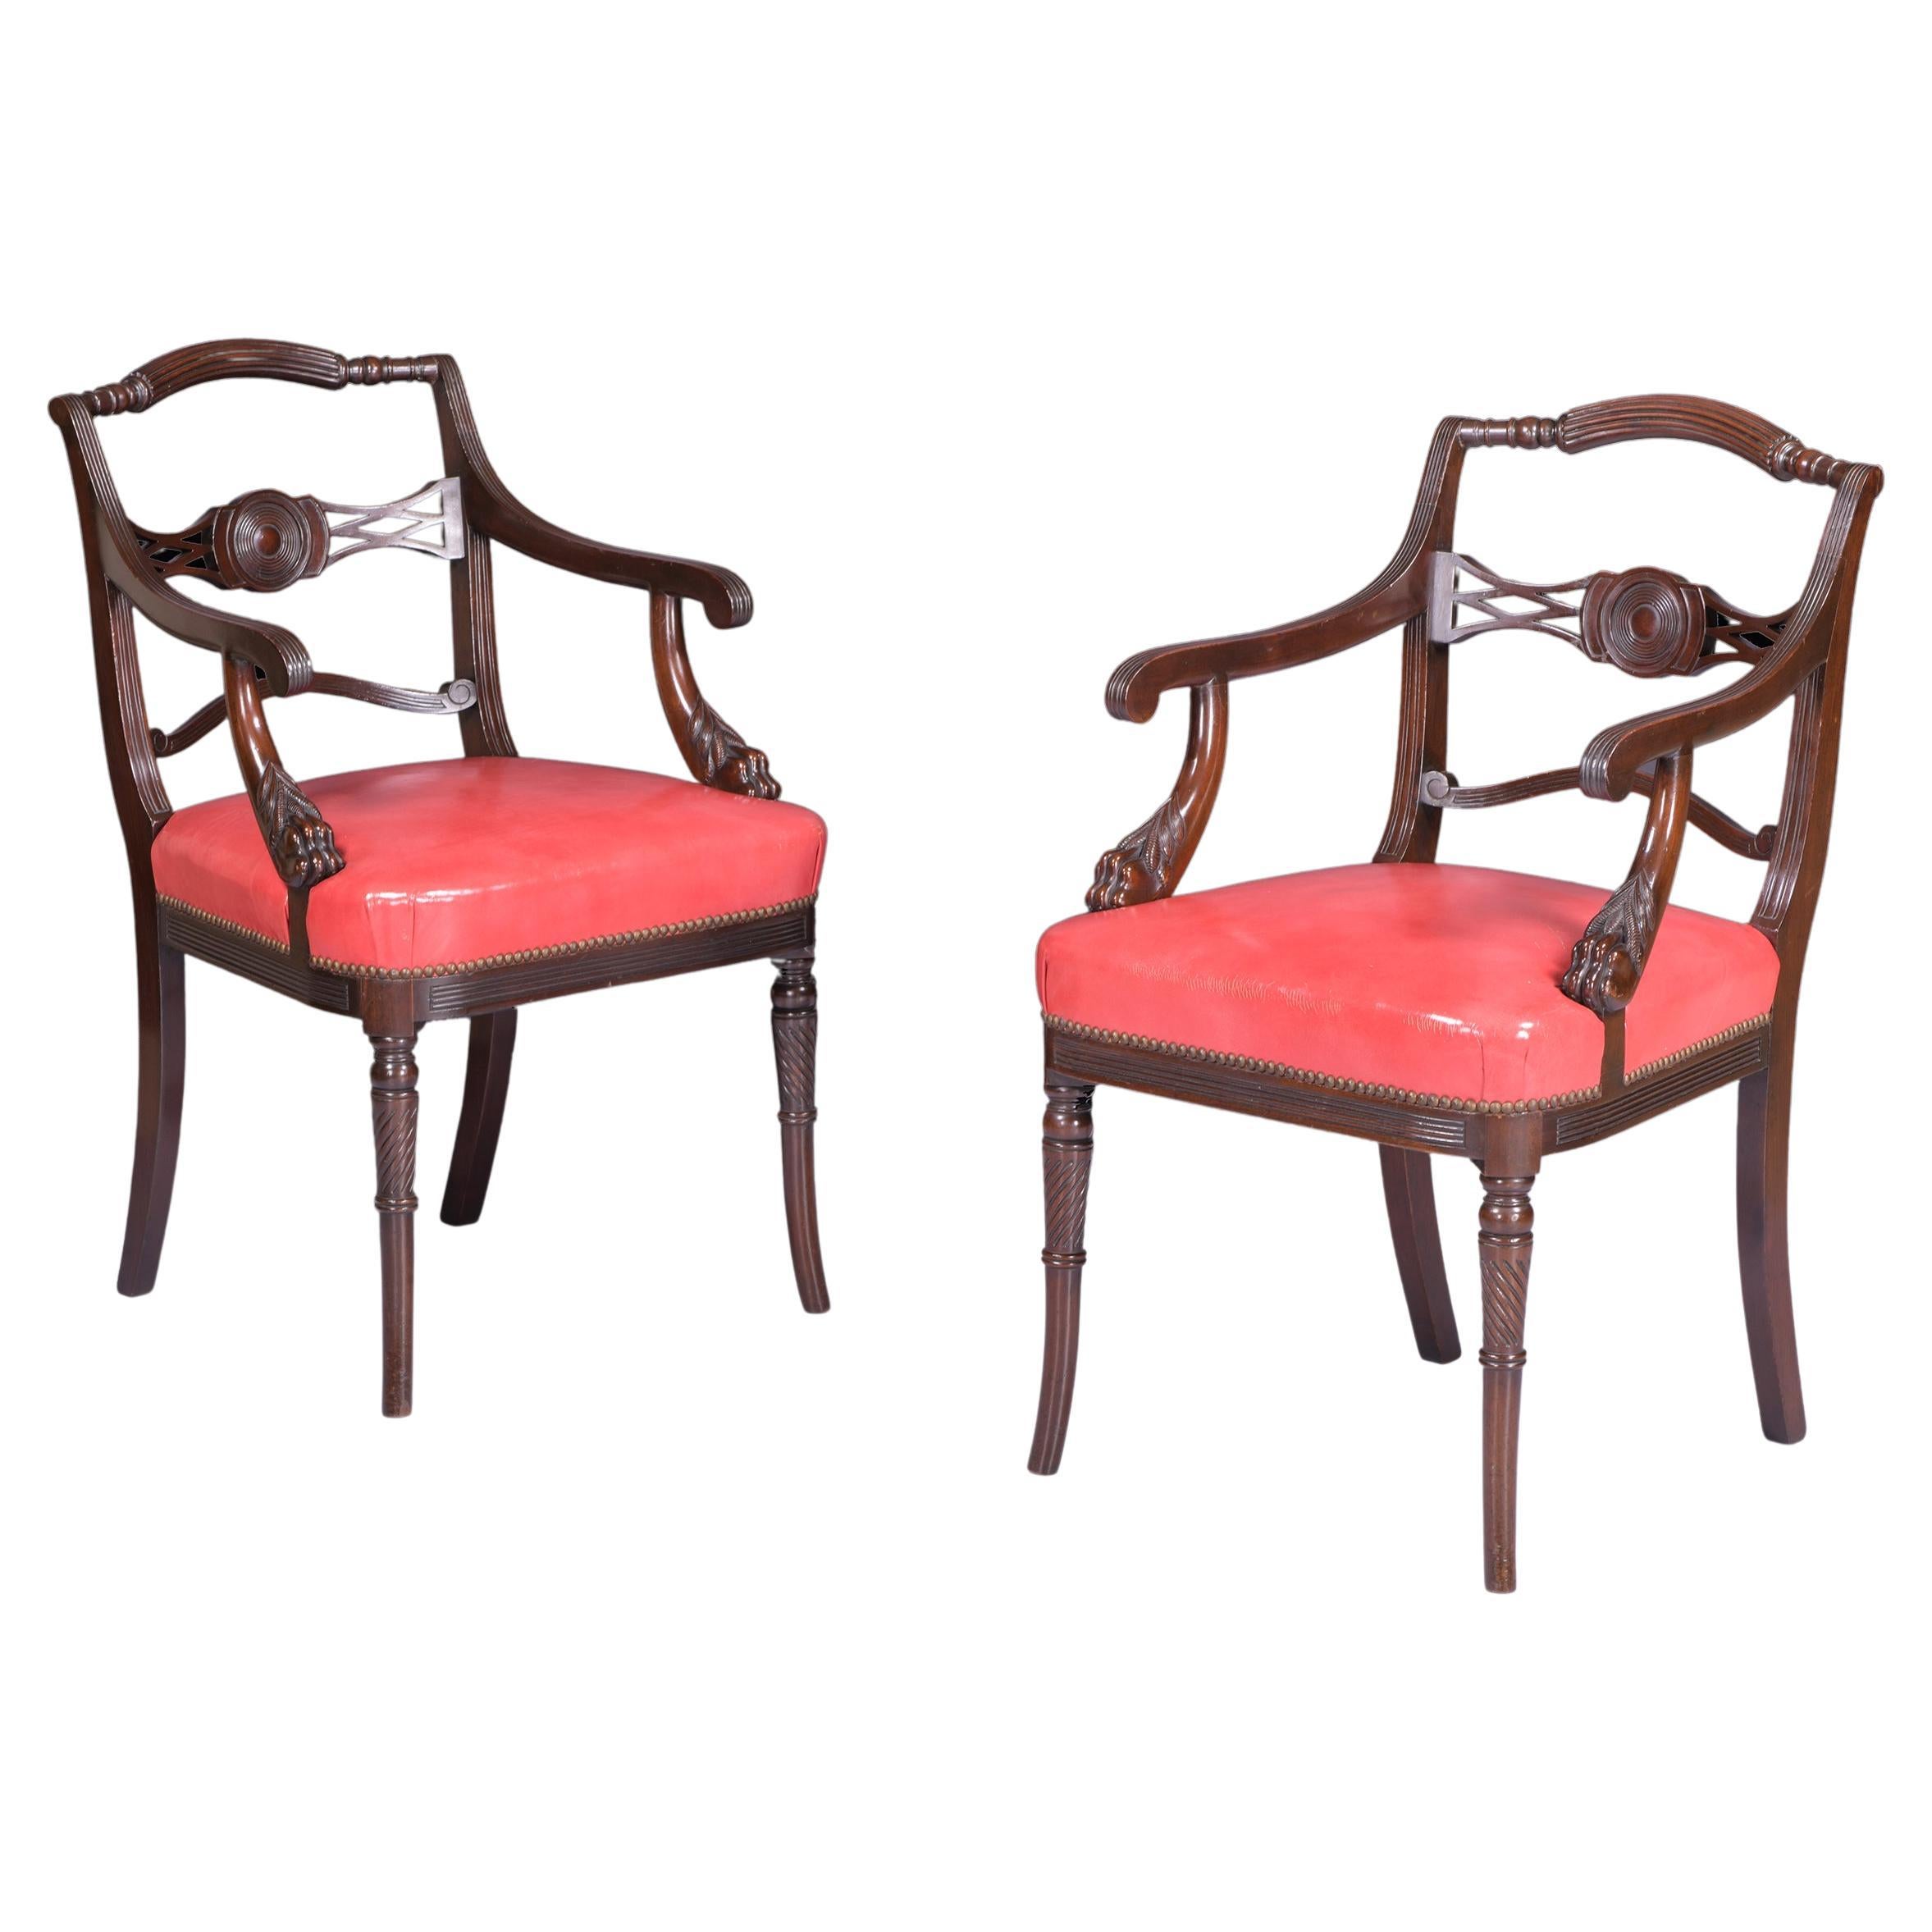 Pair of Early 19th Century Irish Regency Armchairs by Mack Williams & Gibton For Sale